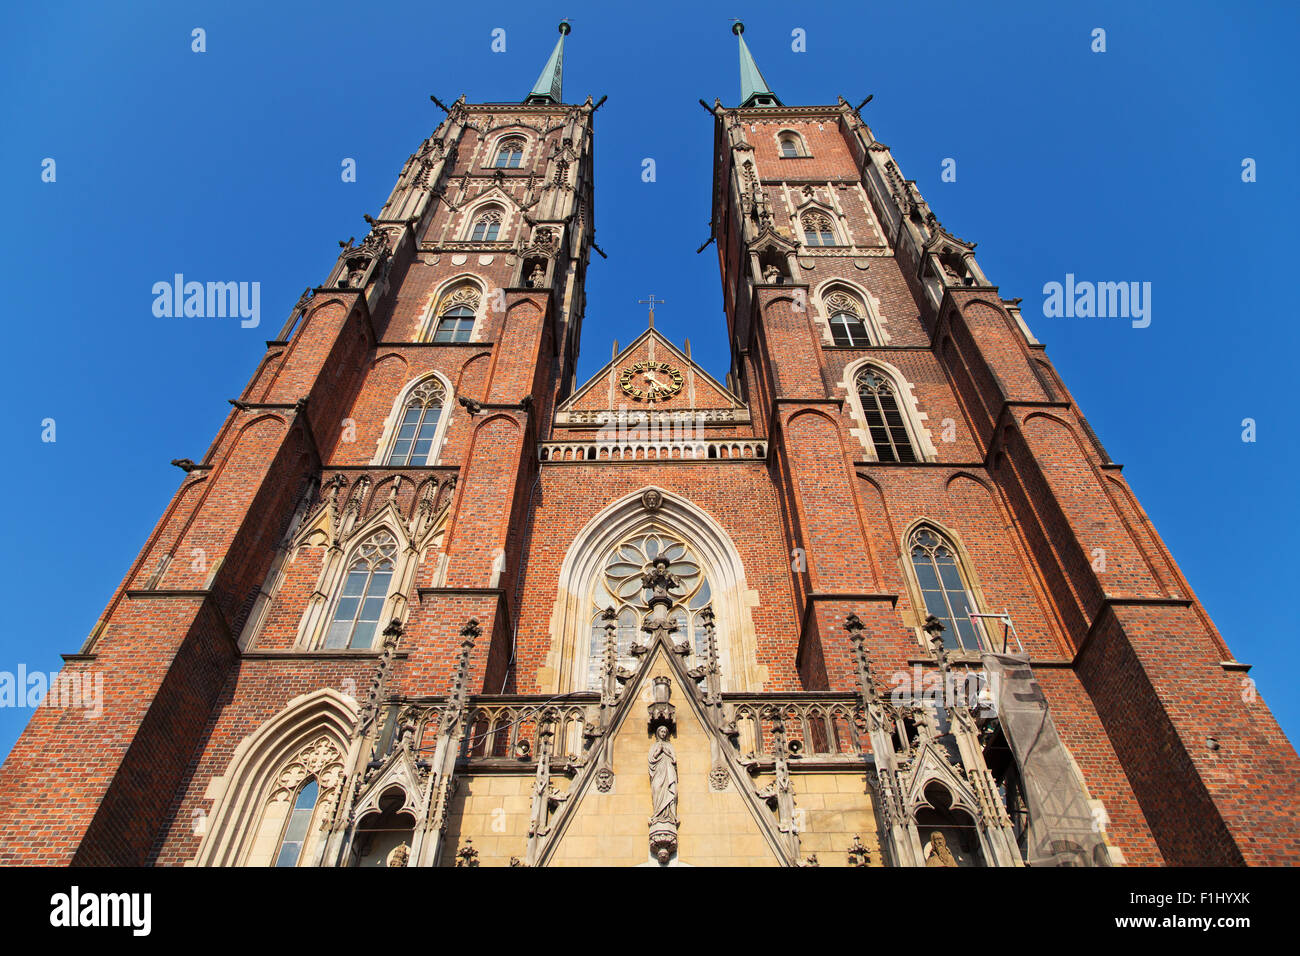 Towers of the St John the Baptist Cathedral, Wroclaw, Poland. Stock Photo